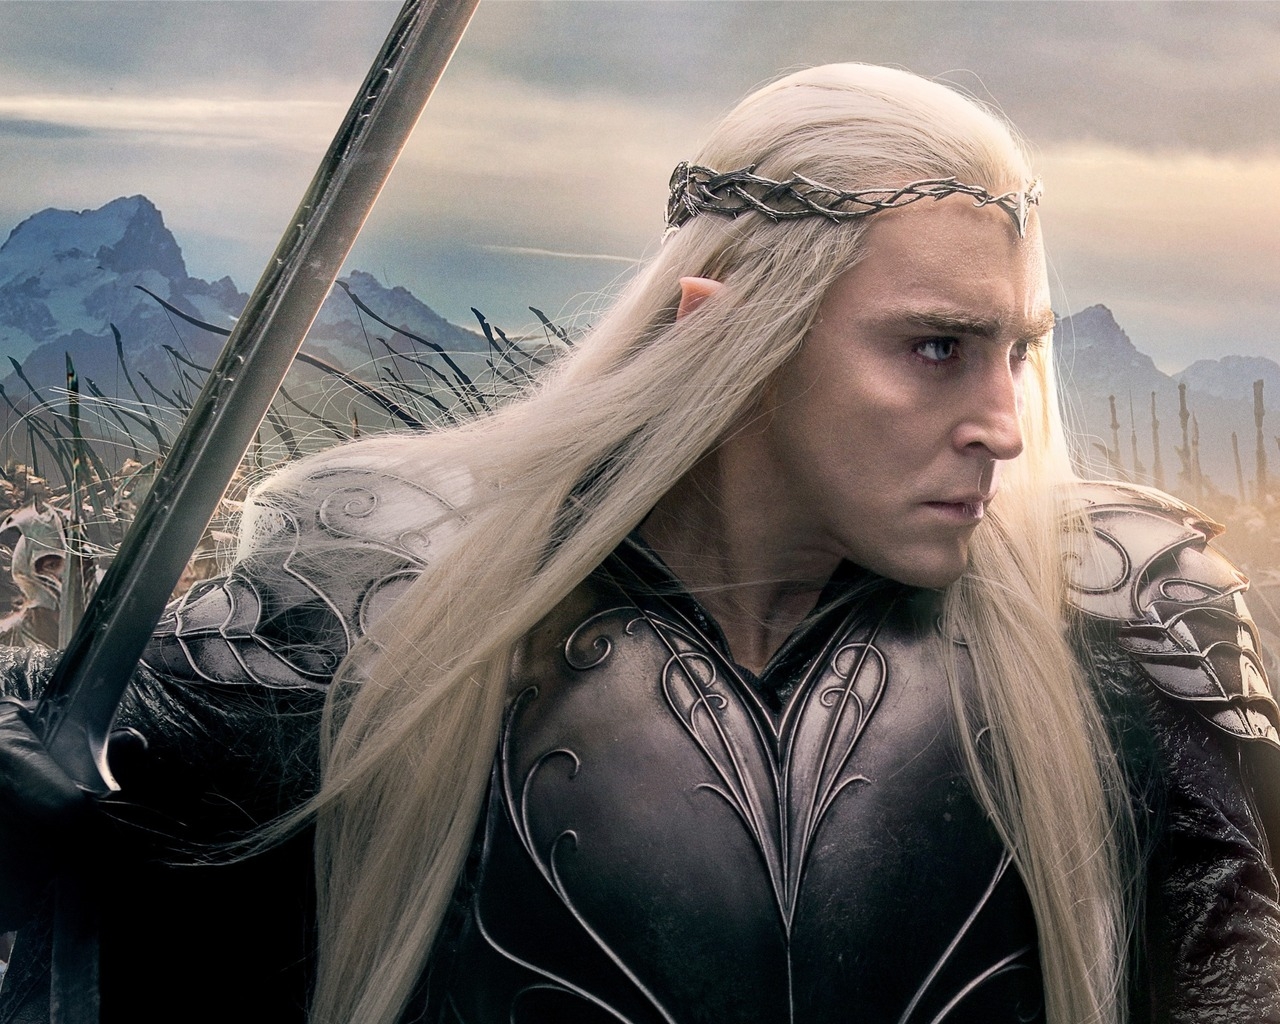  The Hobbit The Battle of the Five Armies for 1280 x 1024 resolution